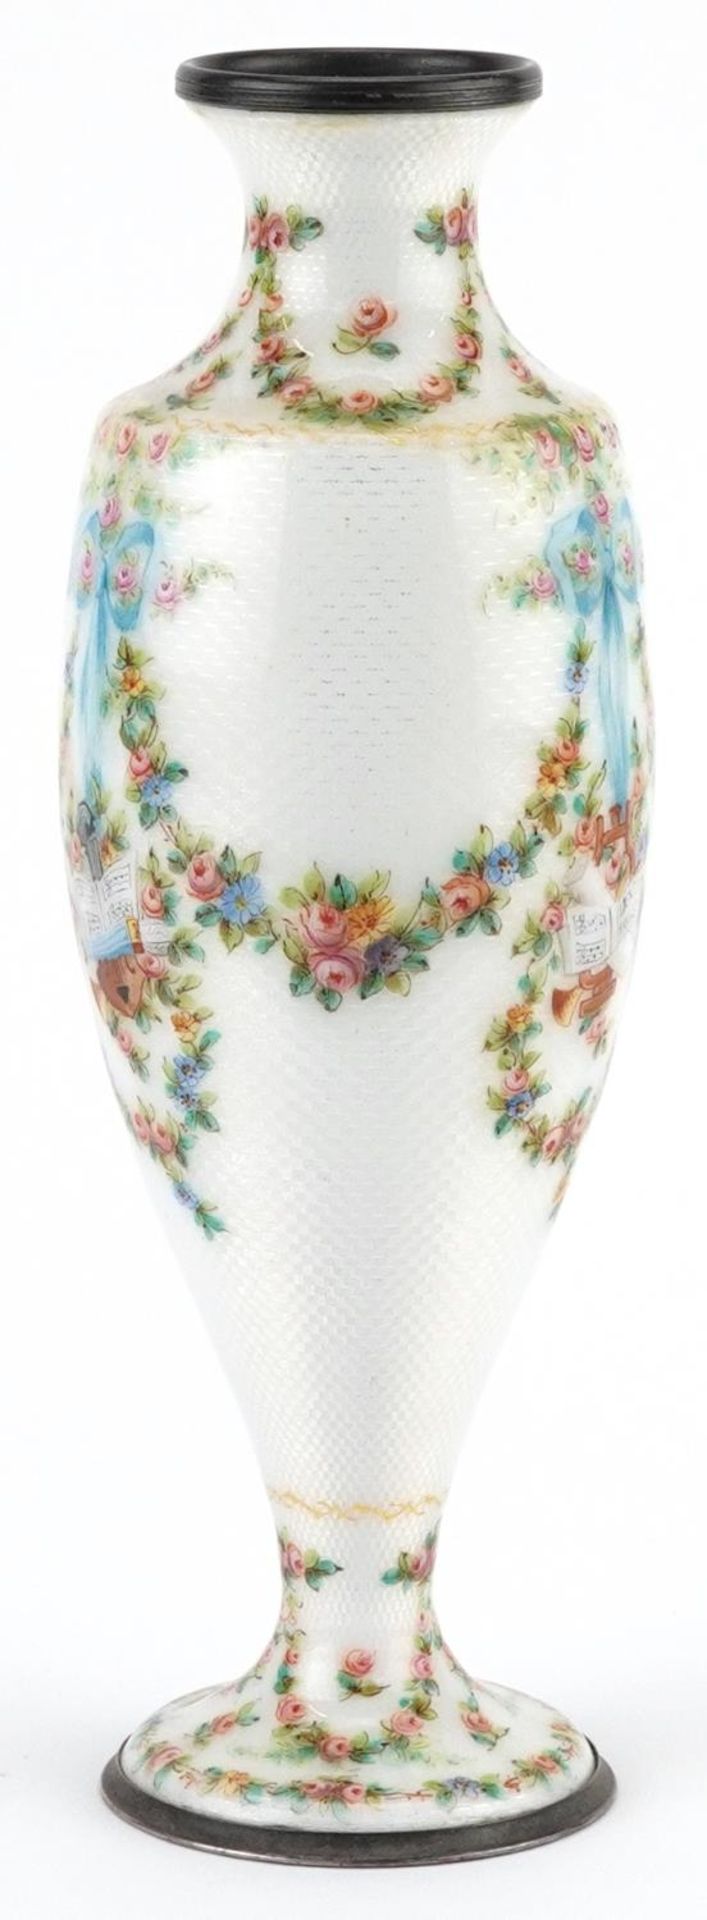 19th century French silver and white guilloche enamel vase finely hand painted with swags, ribbons - Image 7 of 10